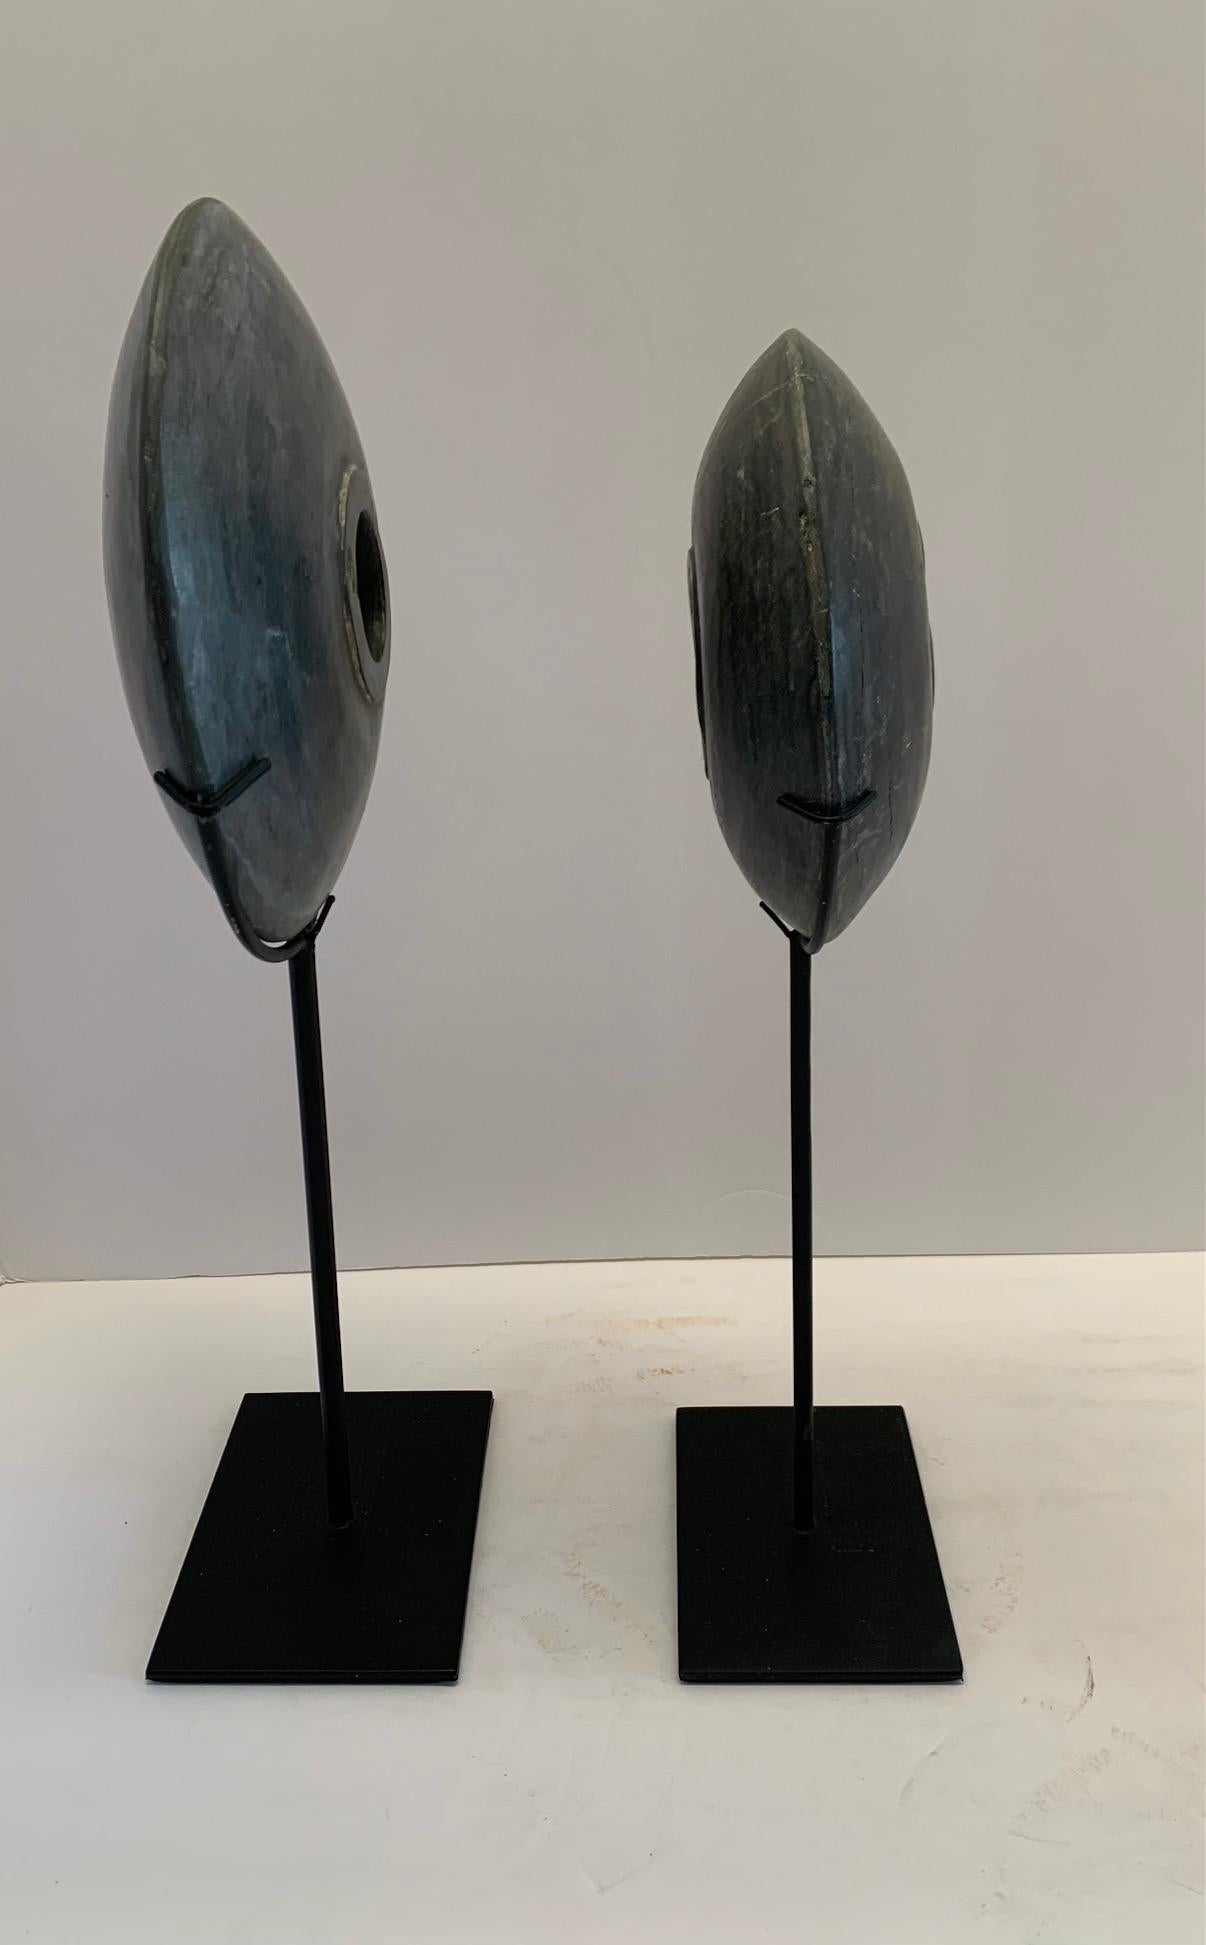 Contemporary Chinese set of two dark grey colored megalith discs on stands.
Smooth finish.
One disc measures  7